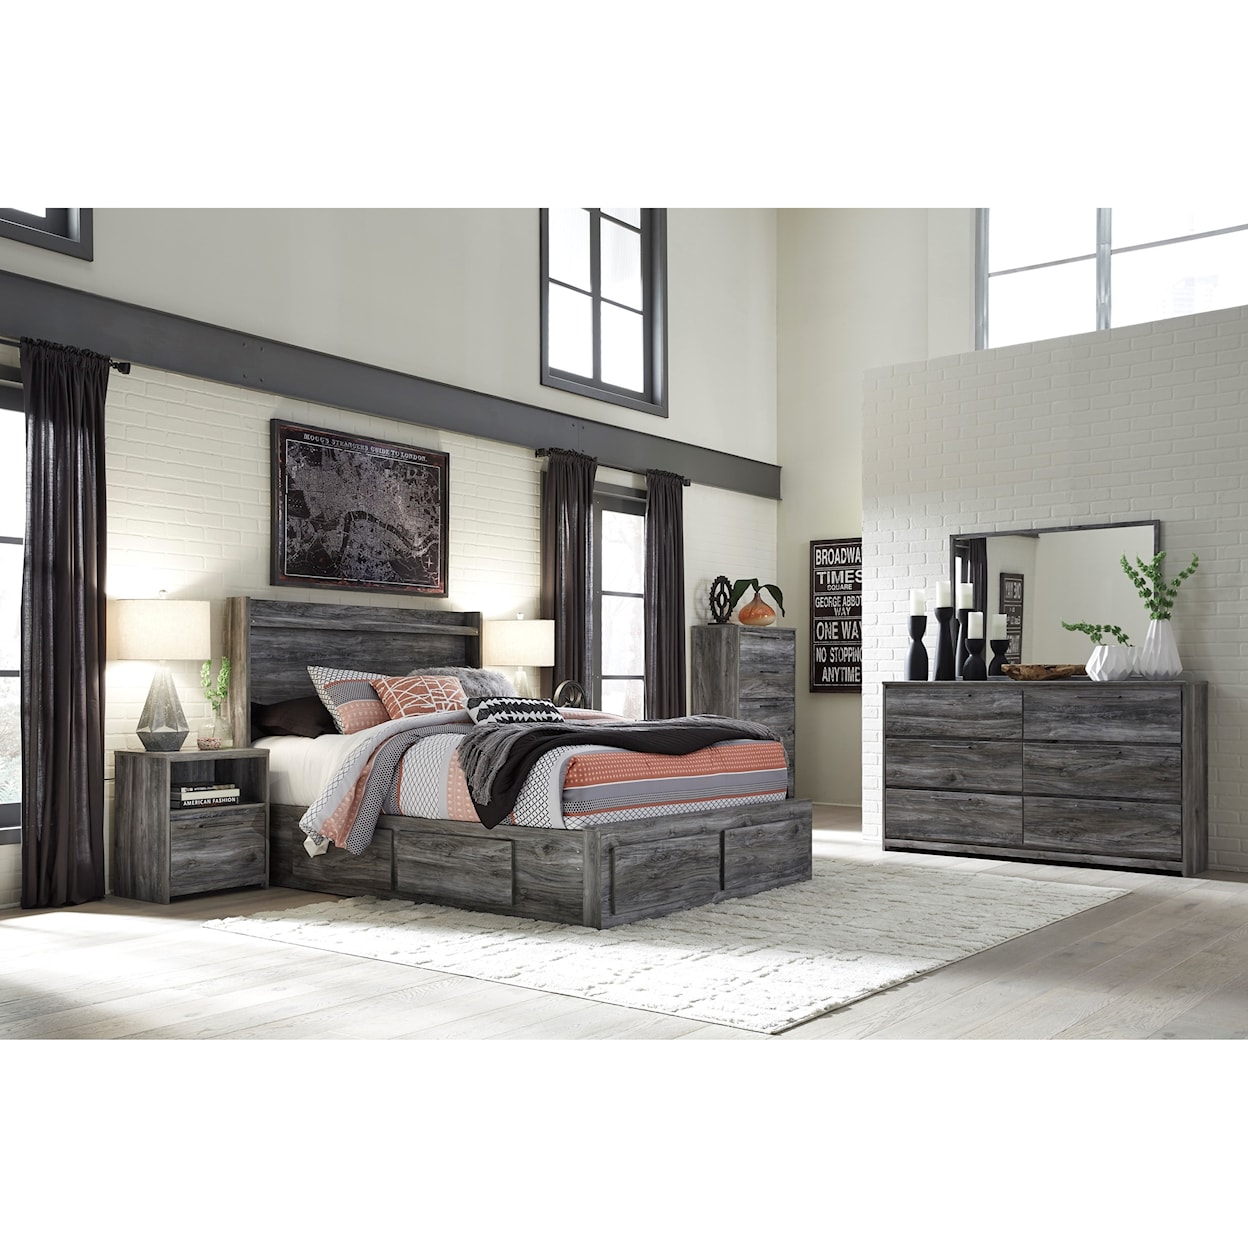 Michael Alan Select Baystorm Queen Storage Bed with 6 Drawers